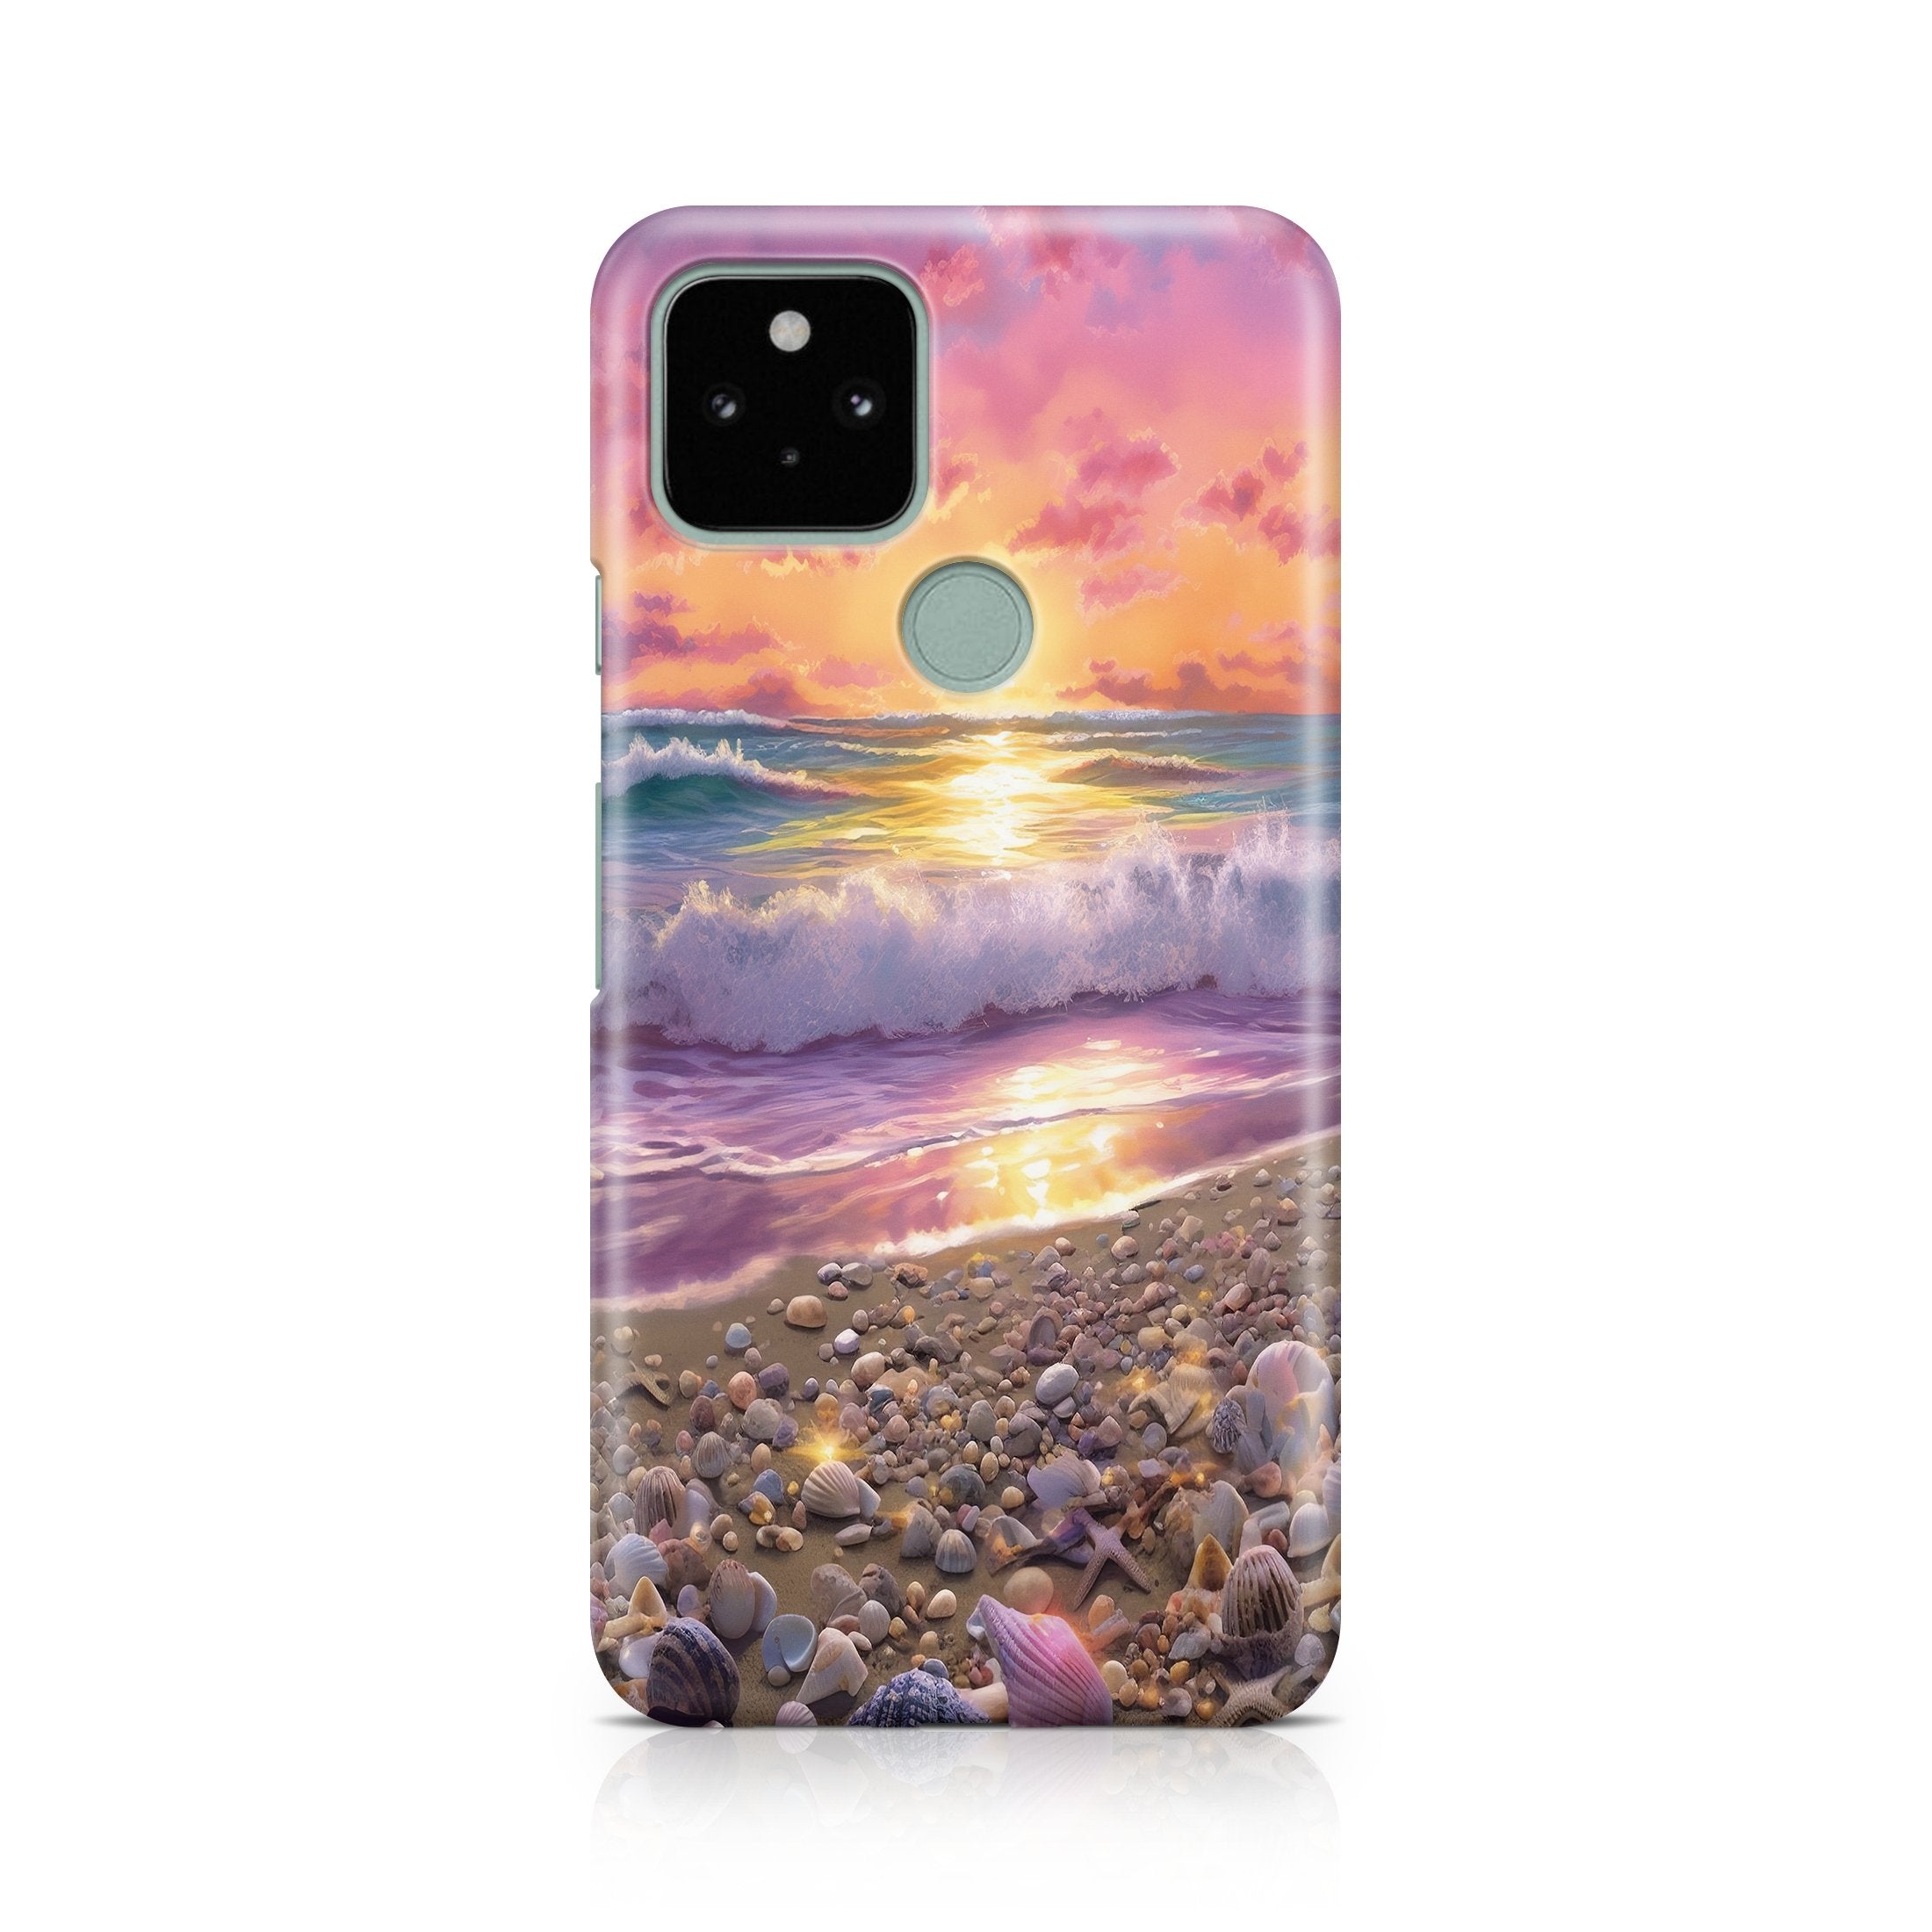 Summer Dreams - Google phone case designs by CaseSwagger